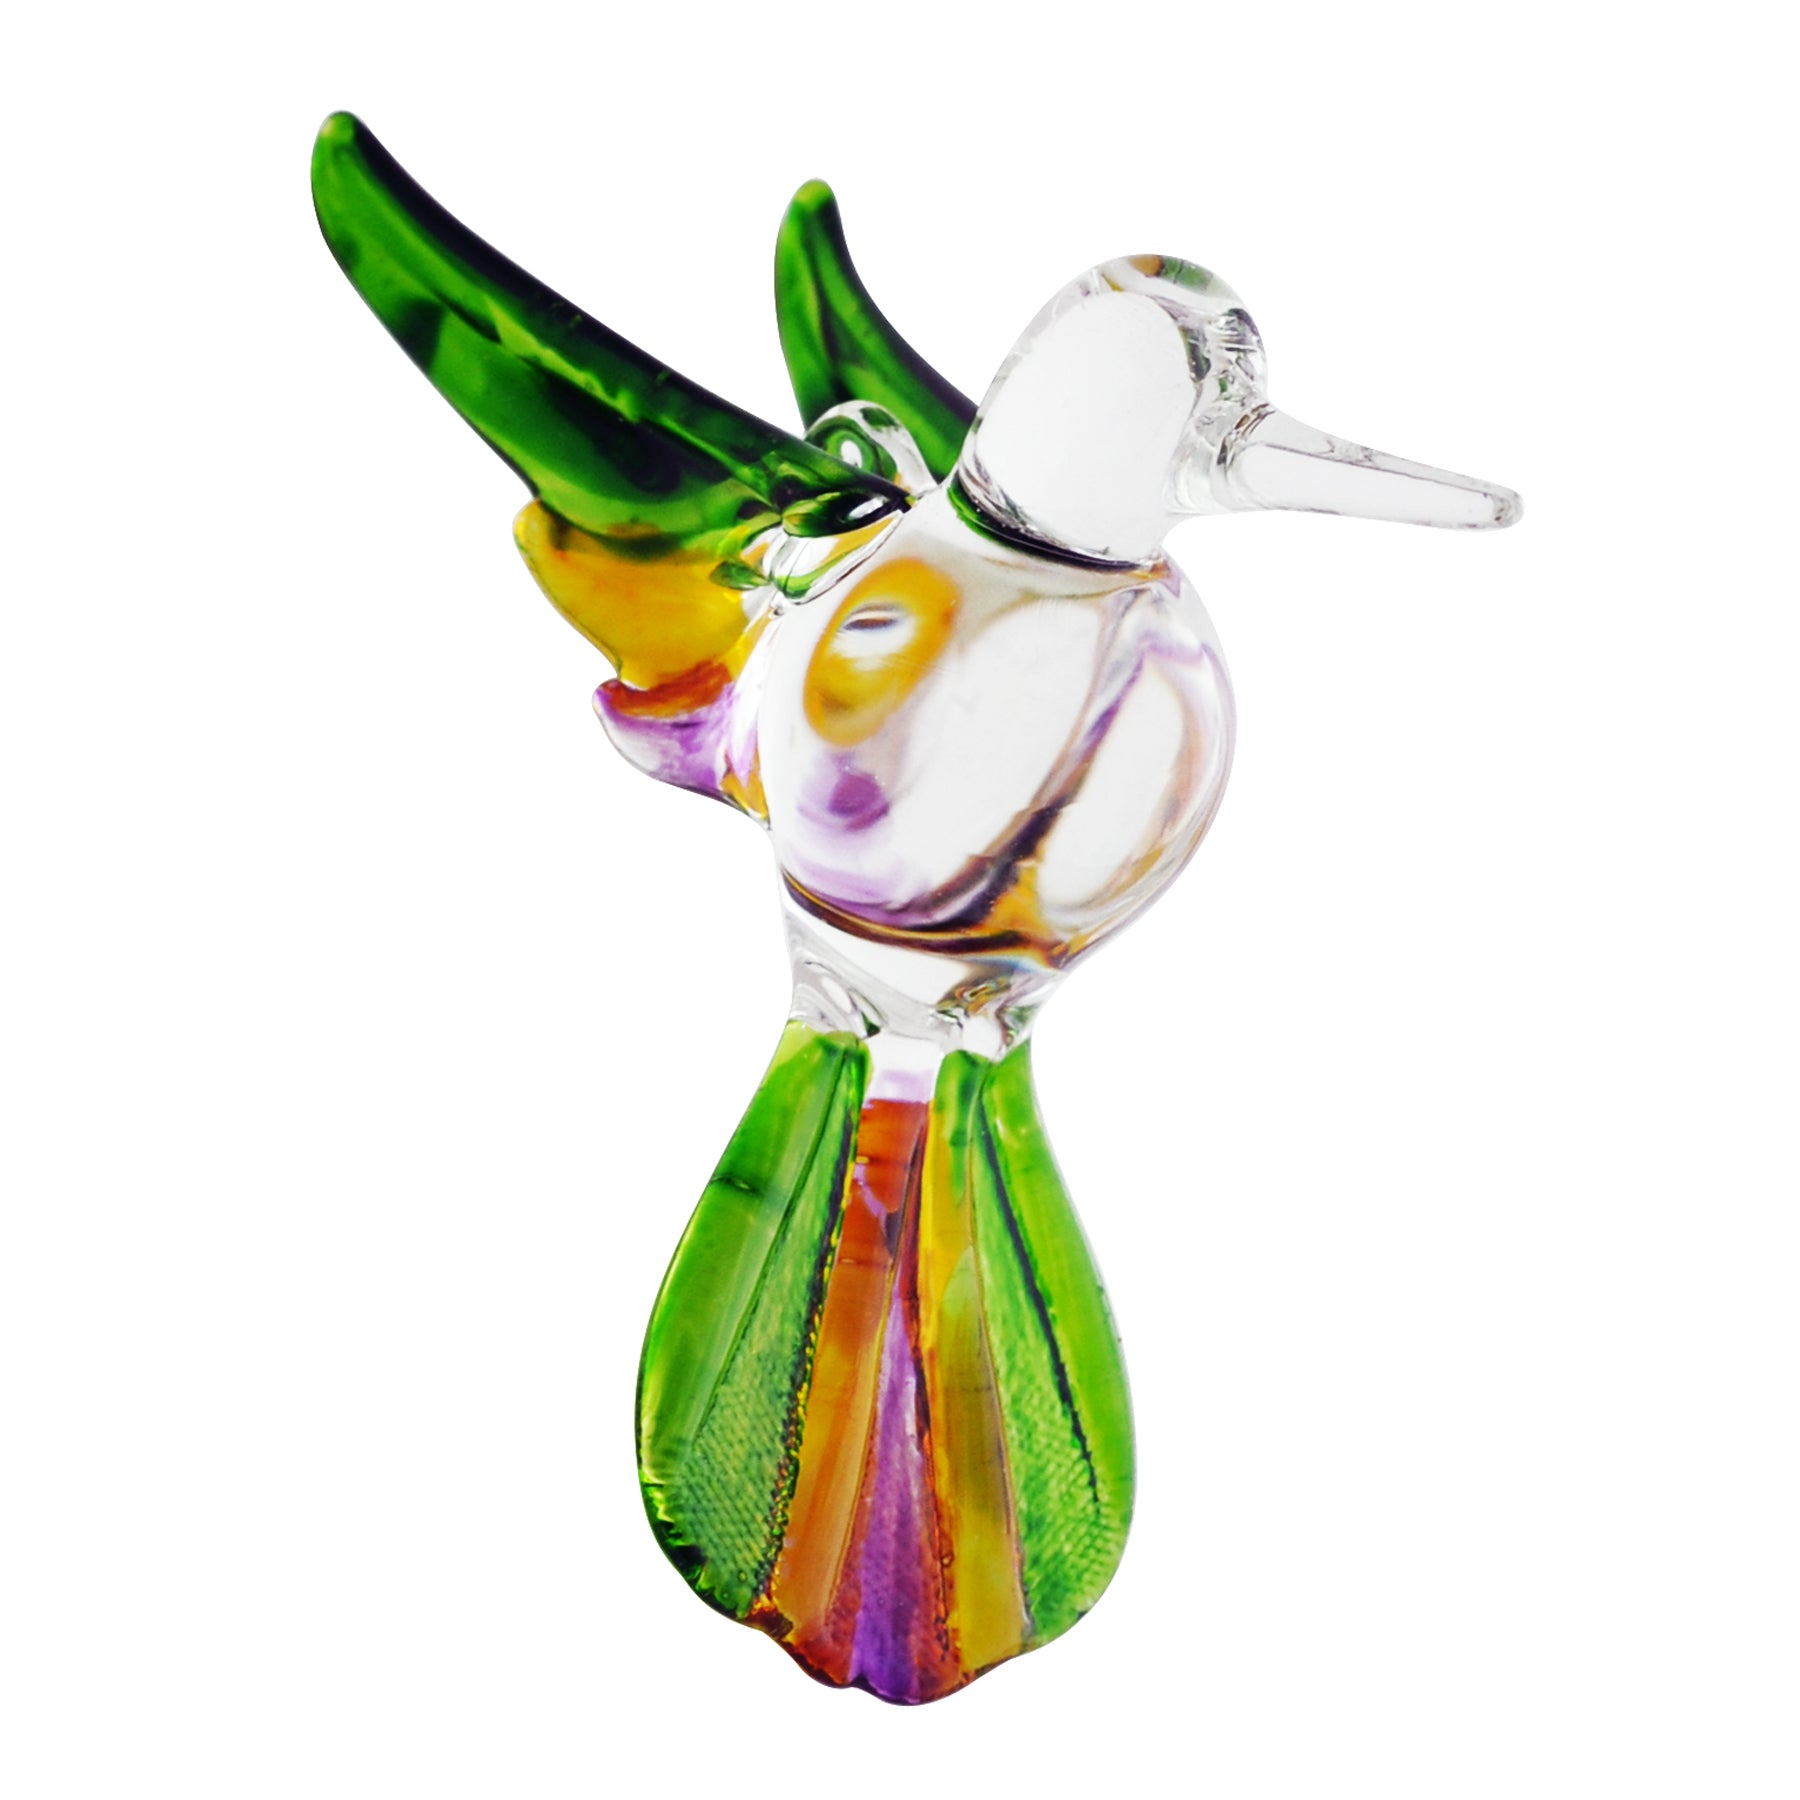 Crystal Castle Glass Multi-Colored Hummingbird ornament in Green with Yellow and Purple accents.